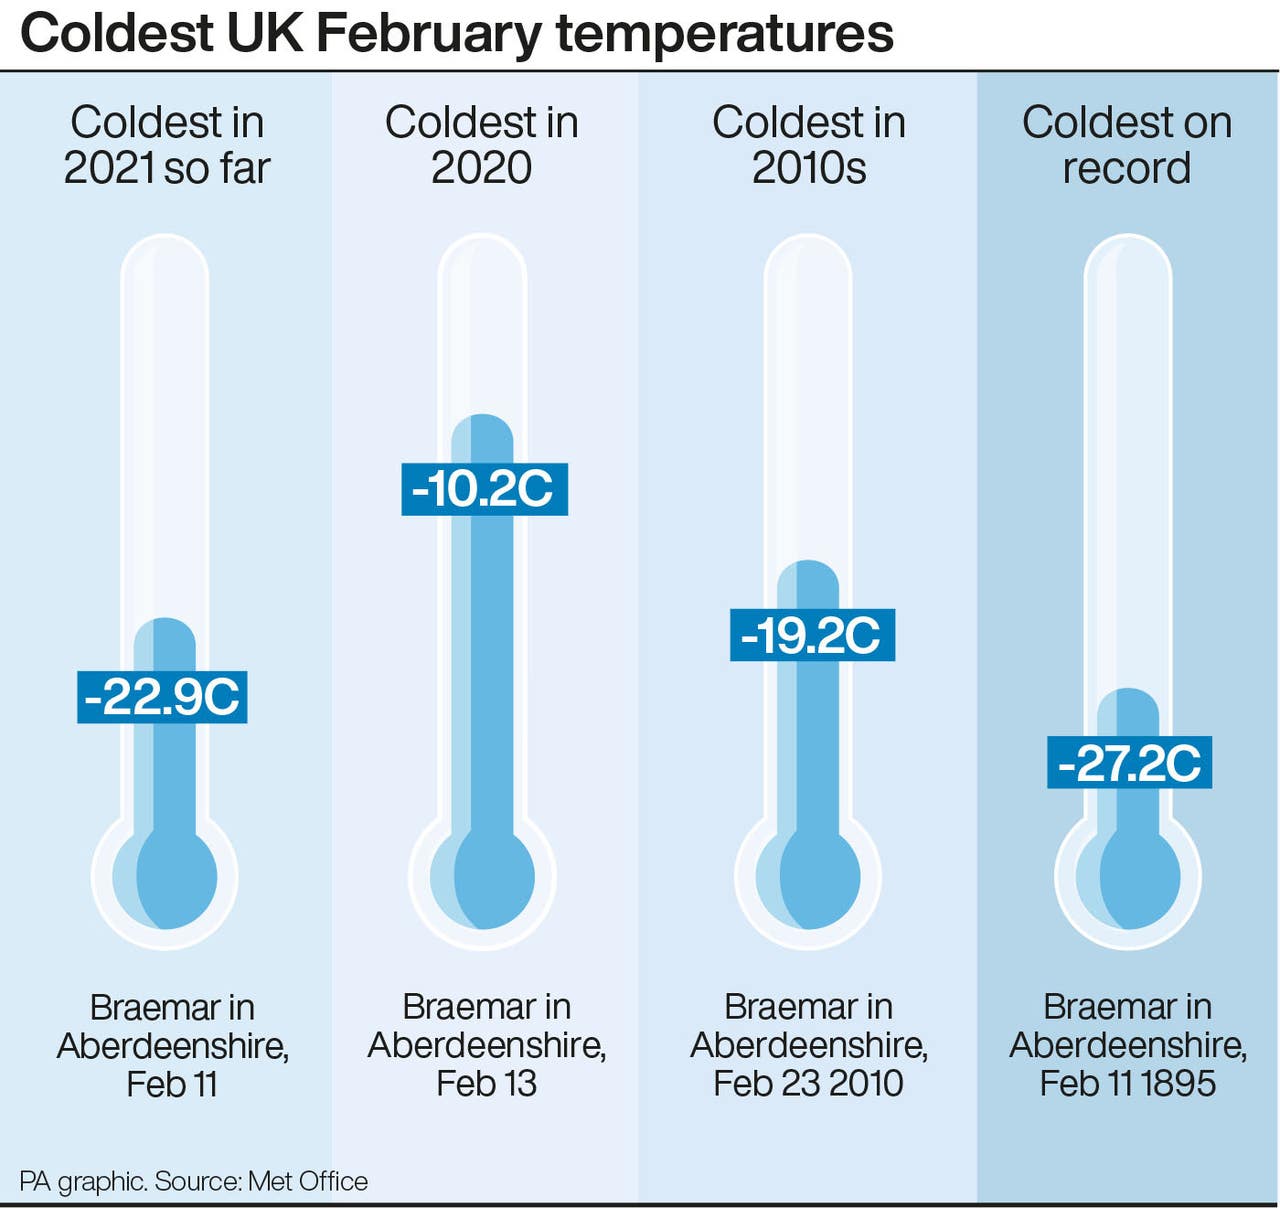 Mercury plunges to minus 22.9C on coldest UK night in more than 25 years